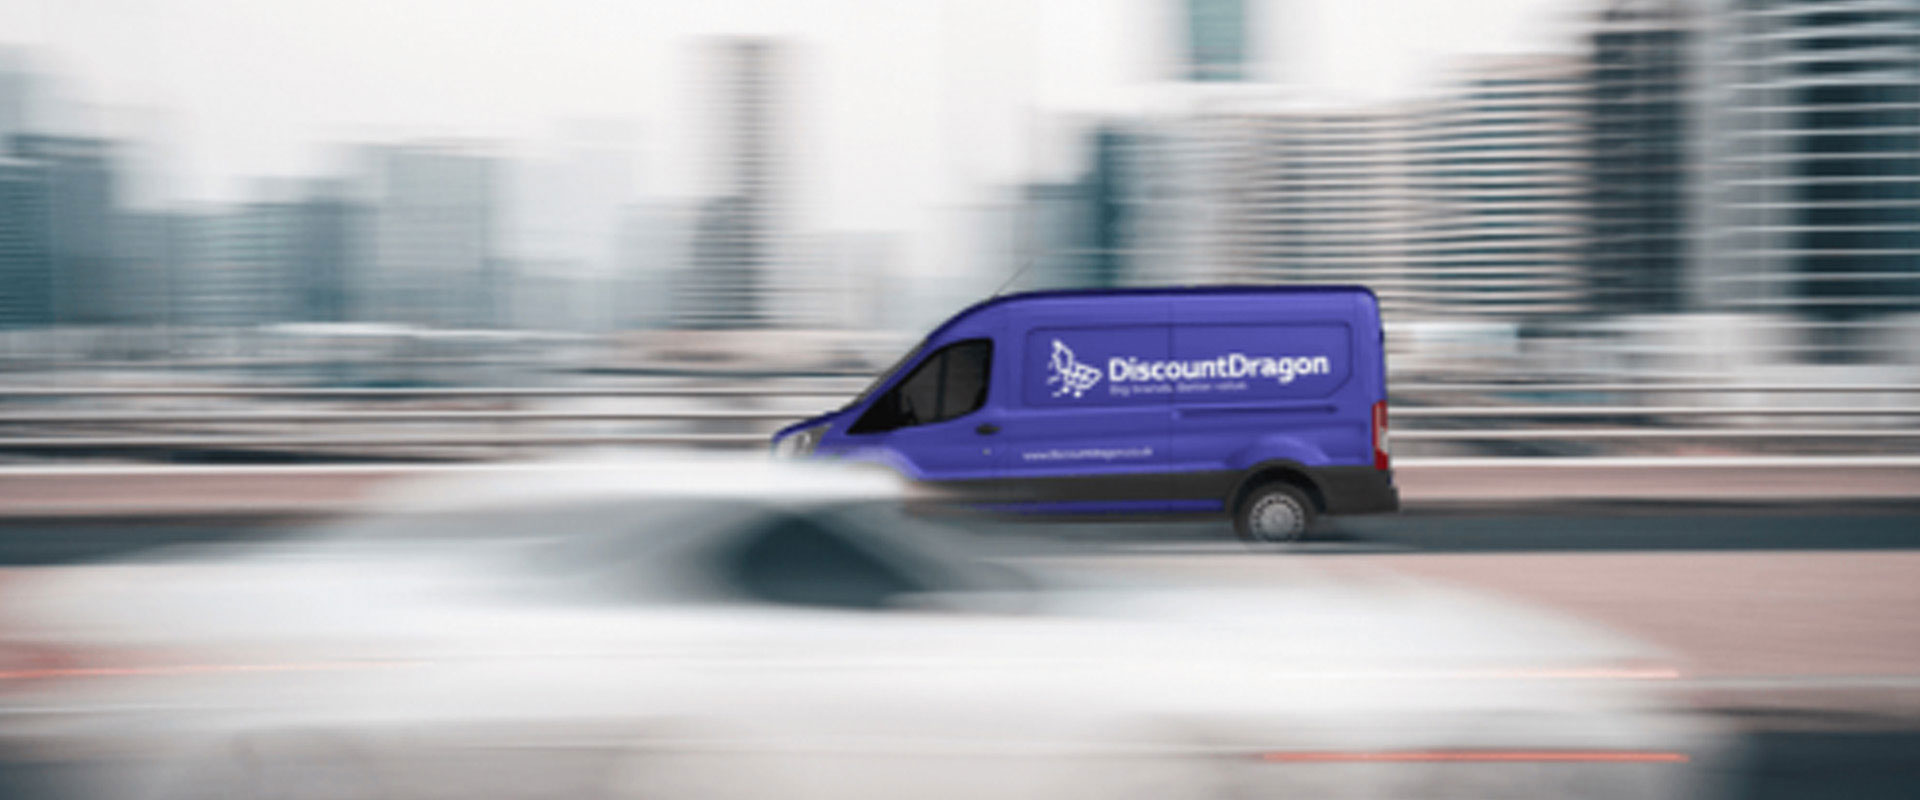 £4m deal for Discount Dragon adds fire to e-commerce ambitions